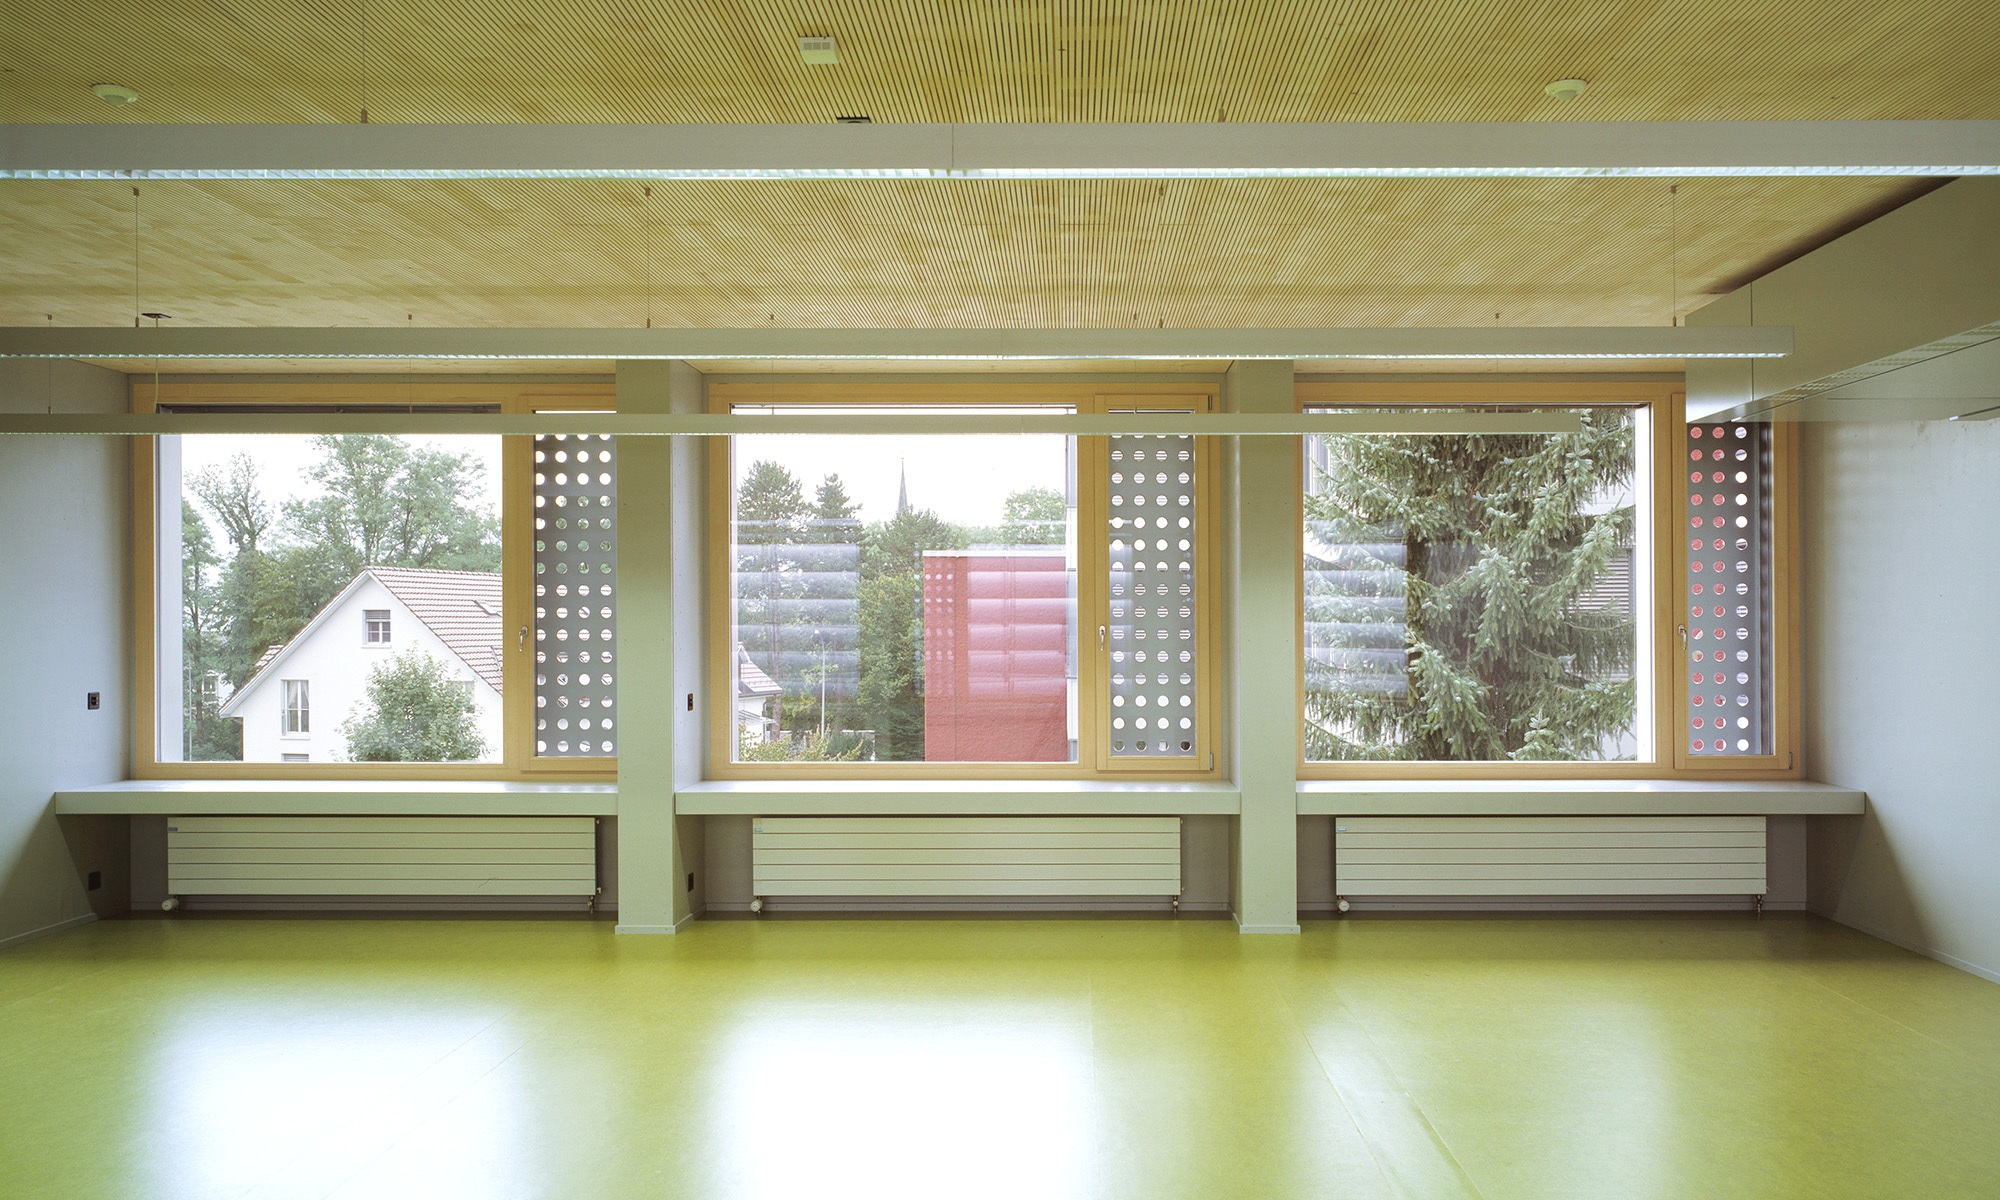 The large windows in the classroom ensure plenty of light.